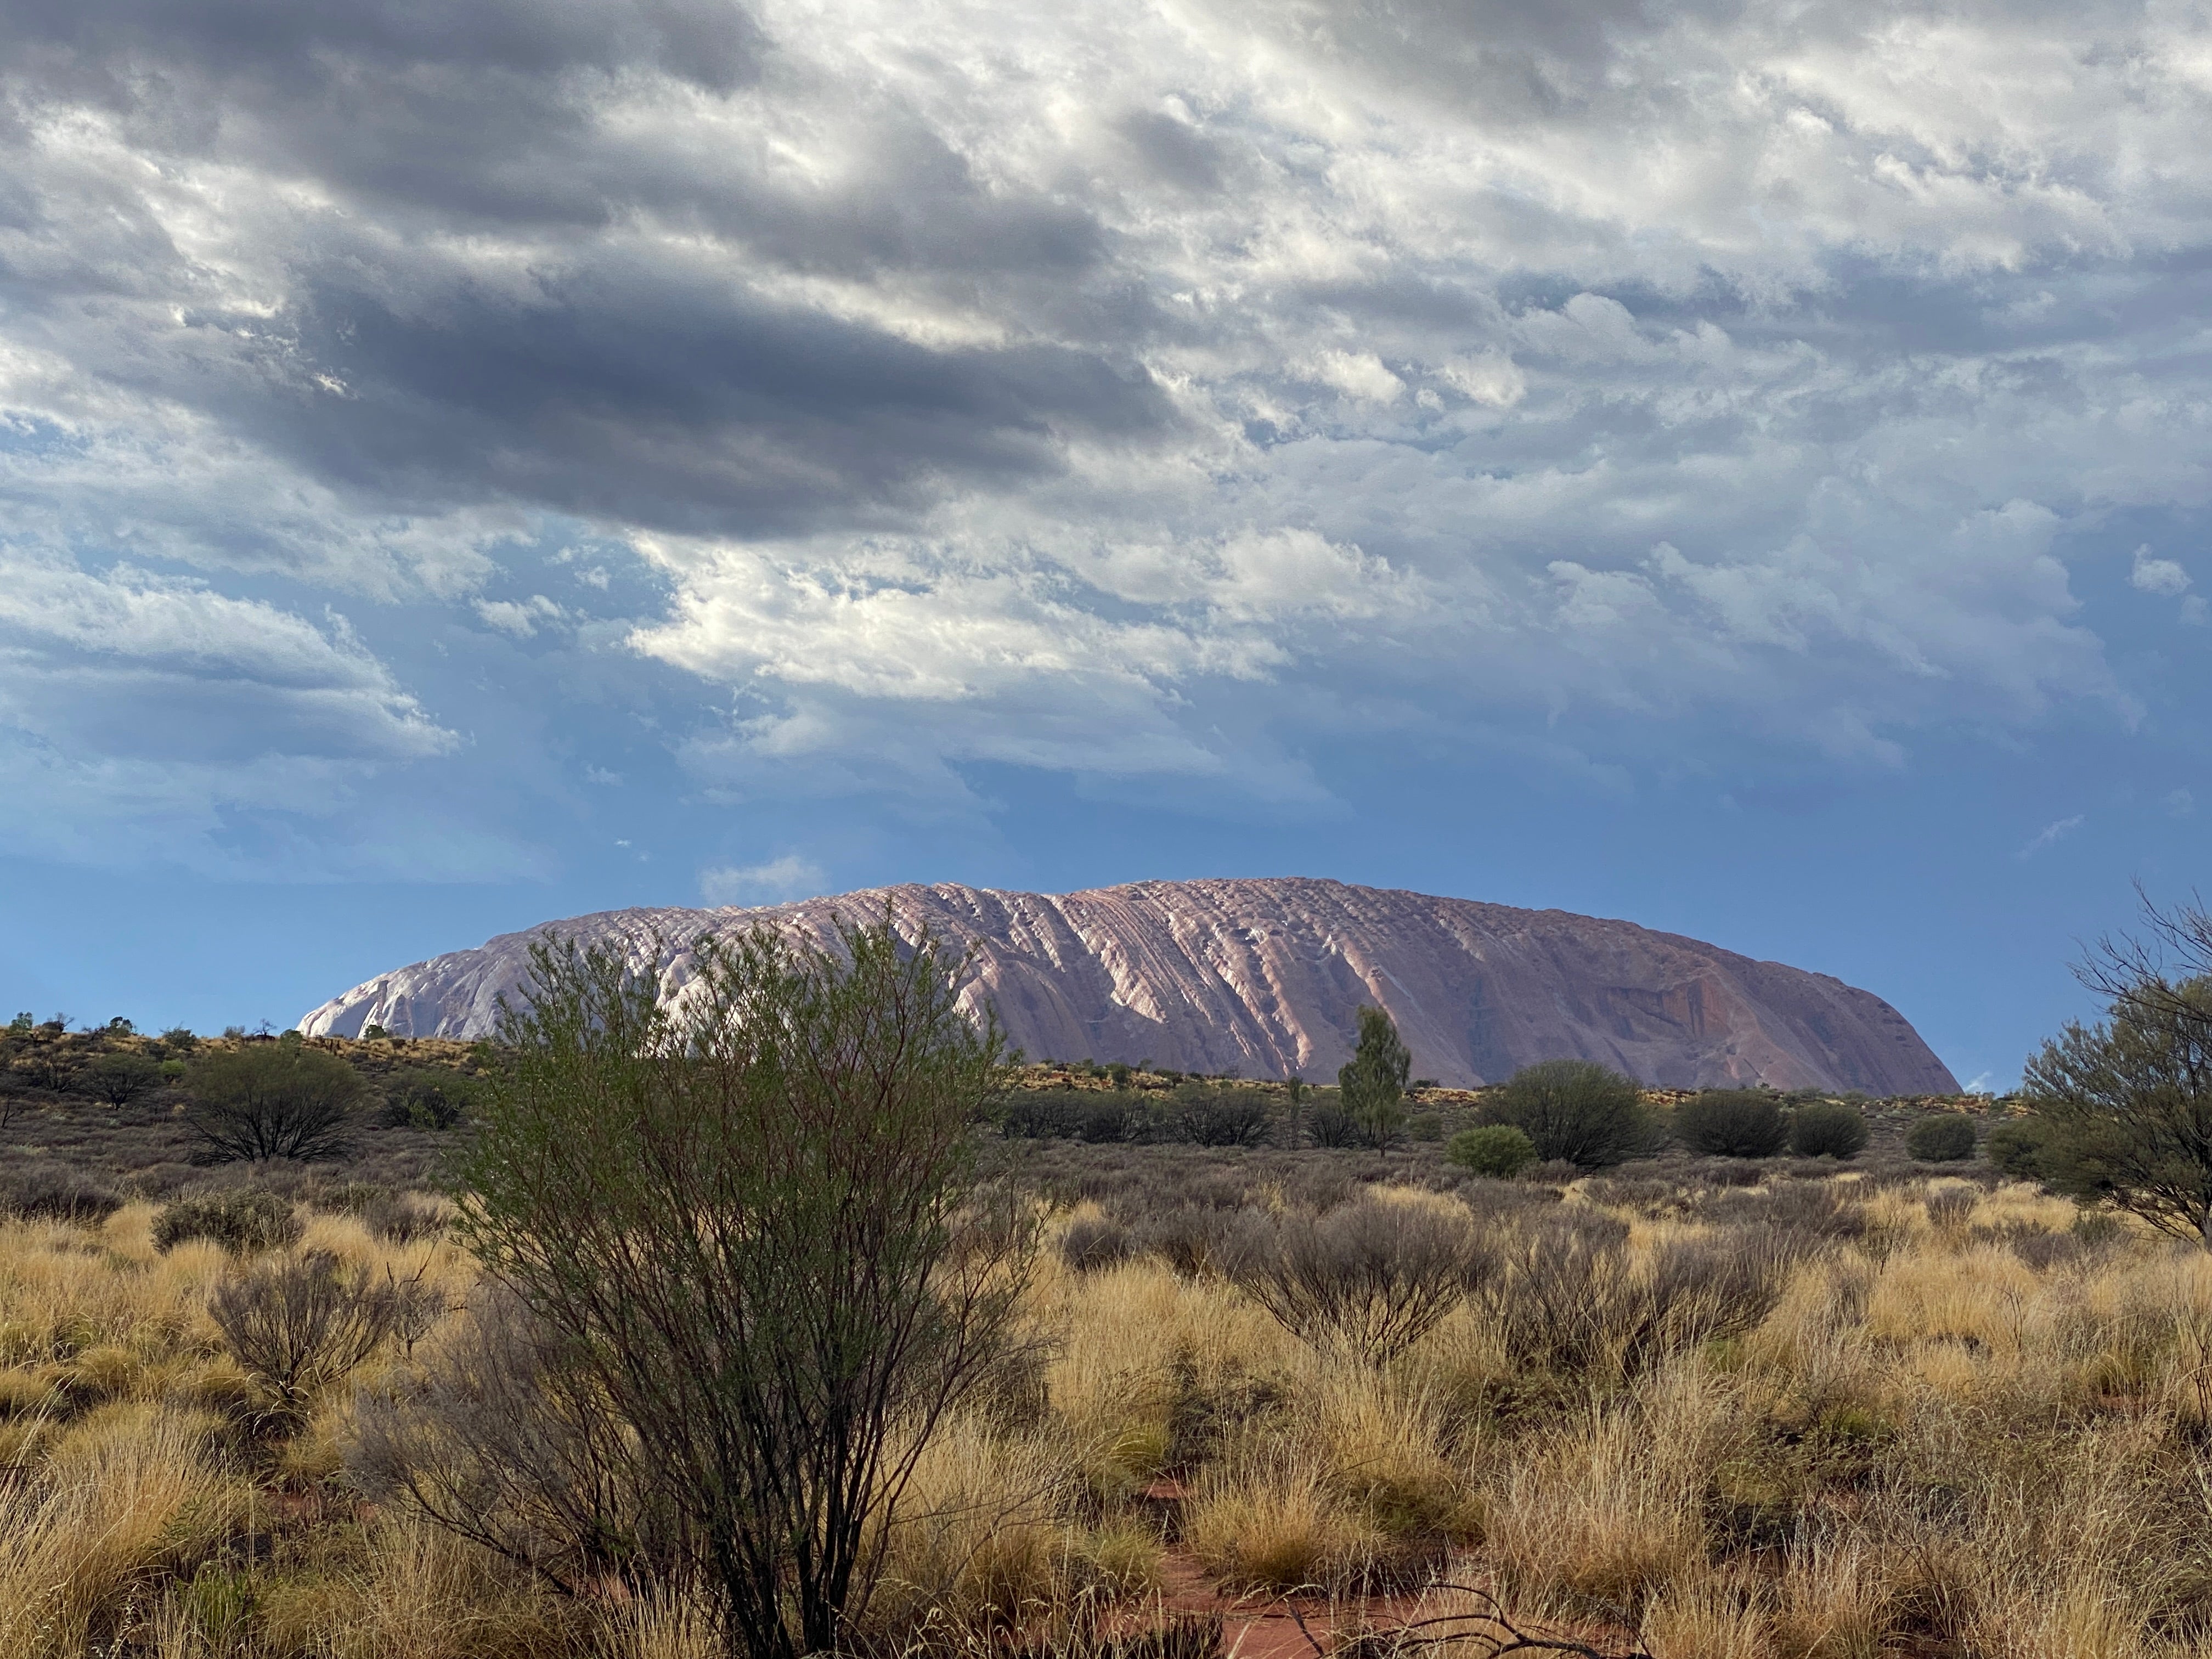 Uluru is best enjoyed over the course of a day, taking in its sights, sounds and smells